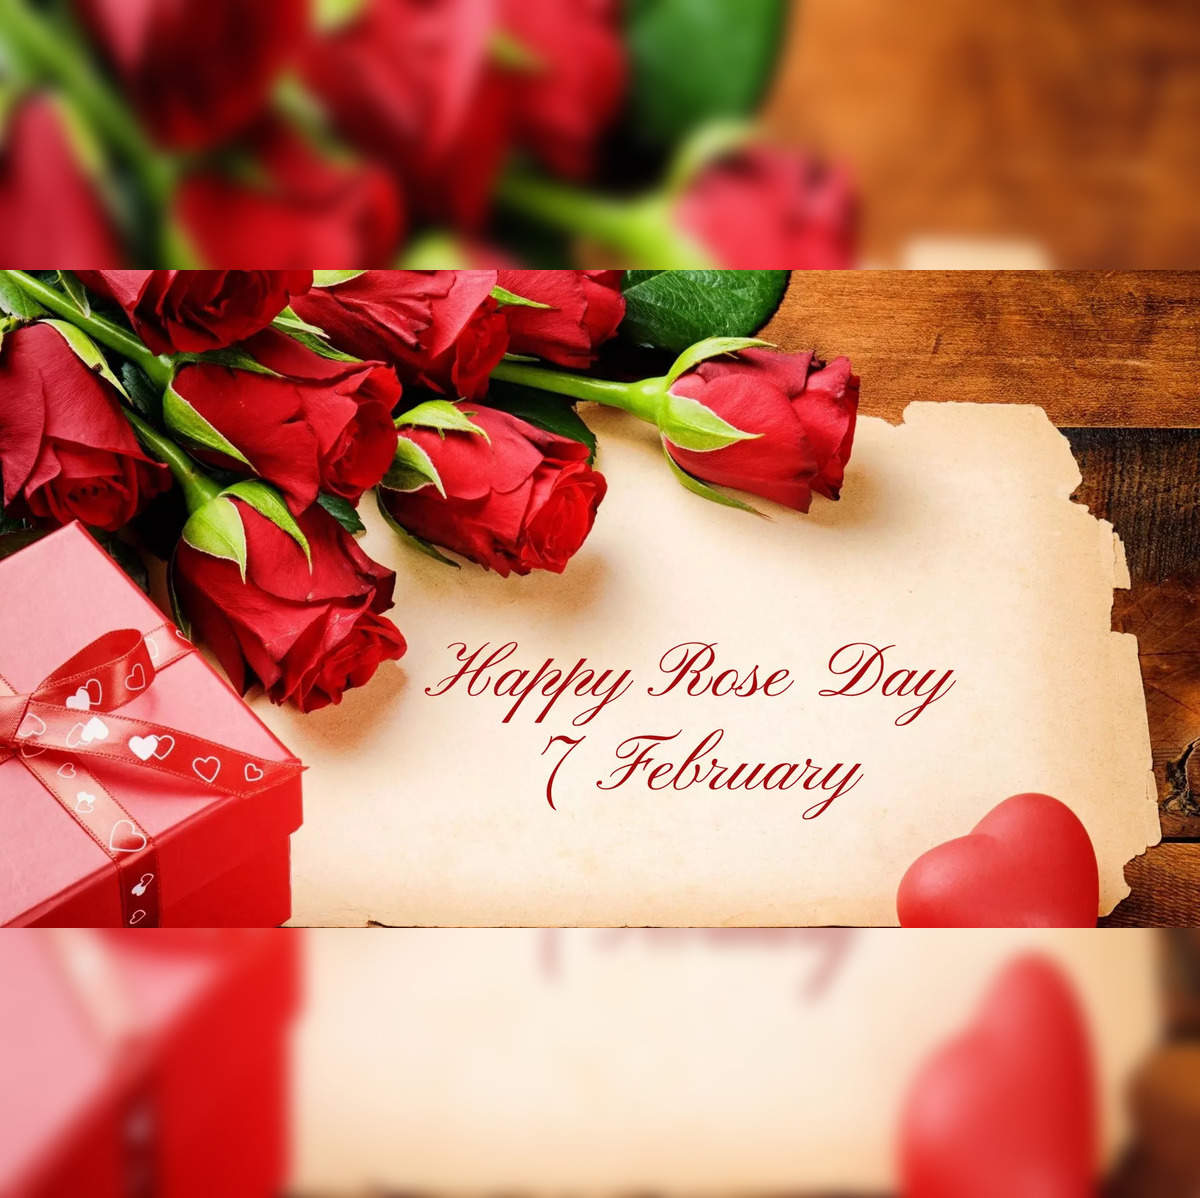 Best Rose Day gifts to delight your loved ones - The Economic Times